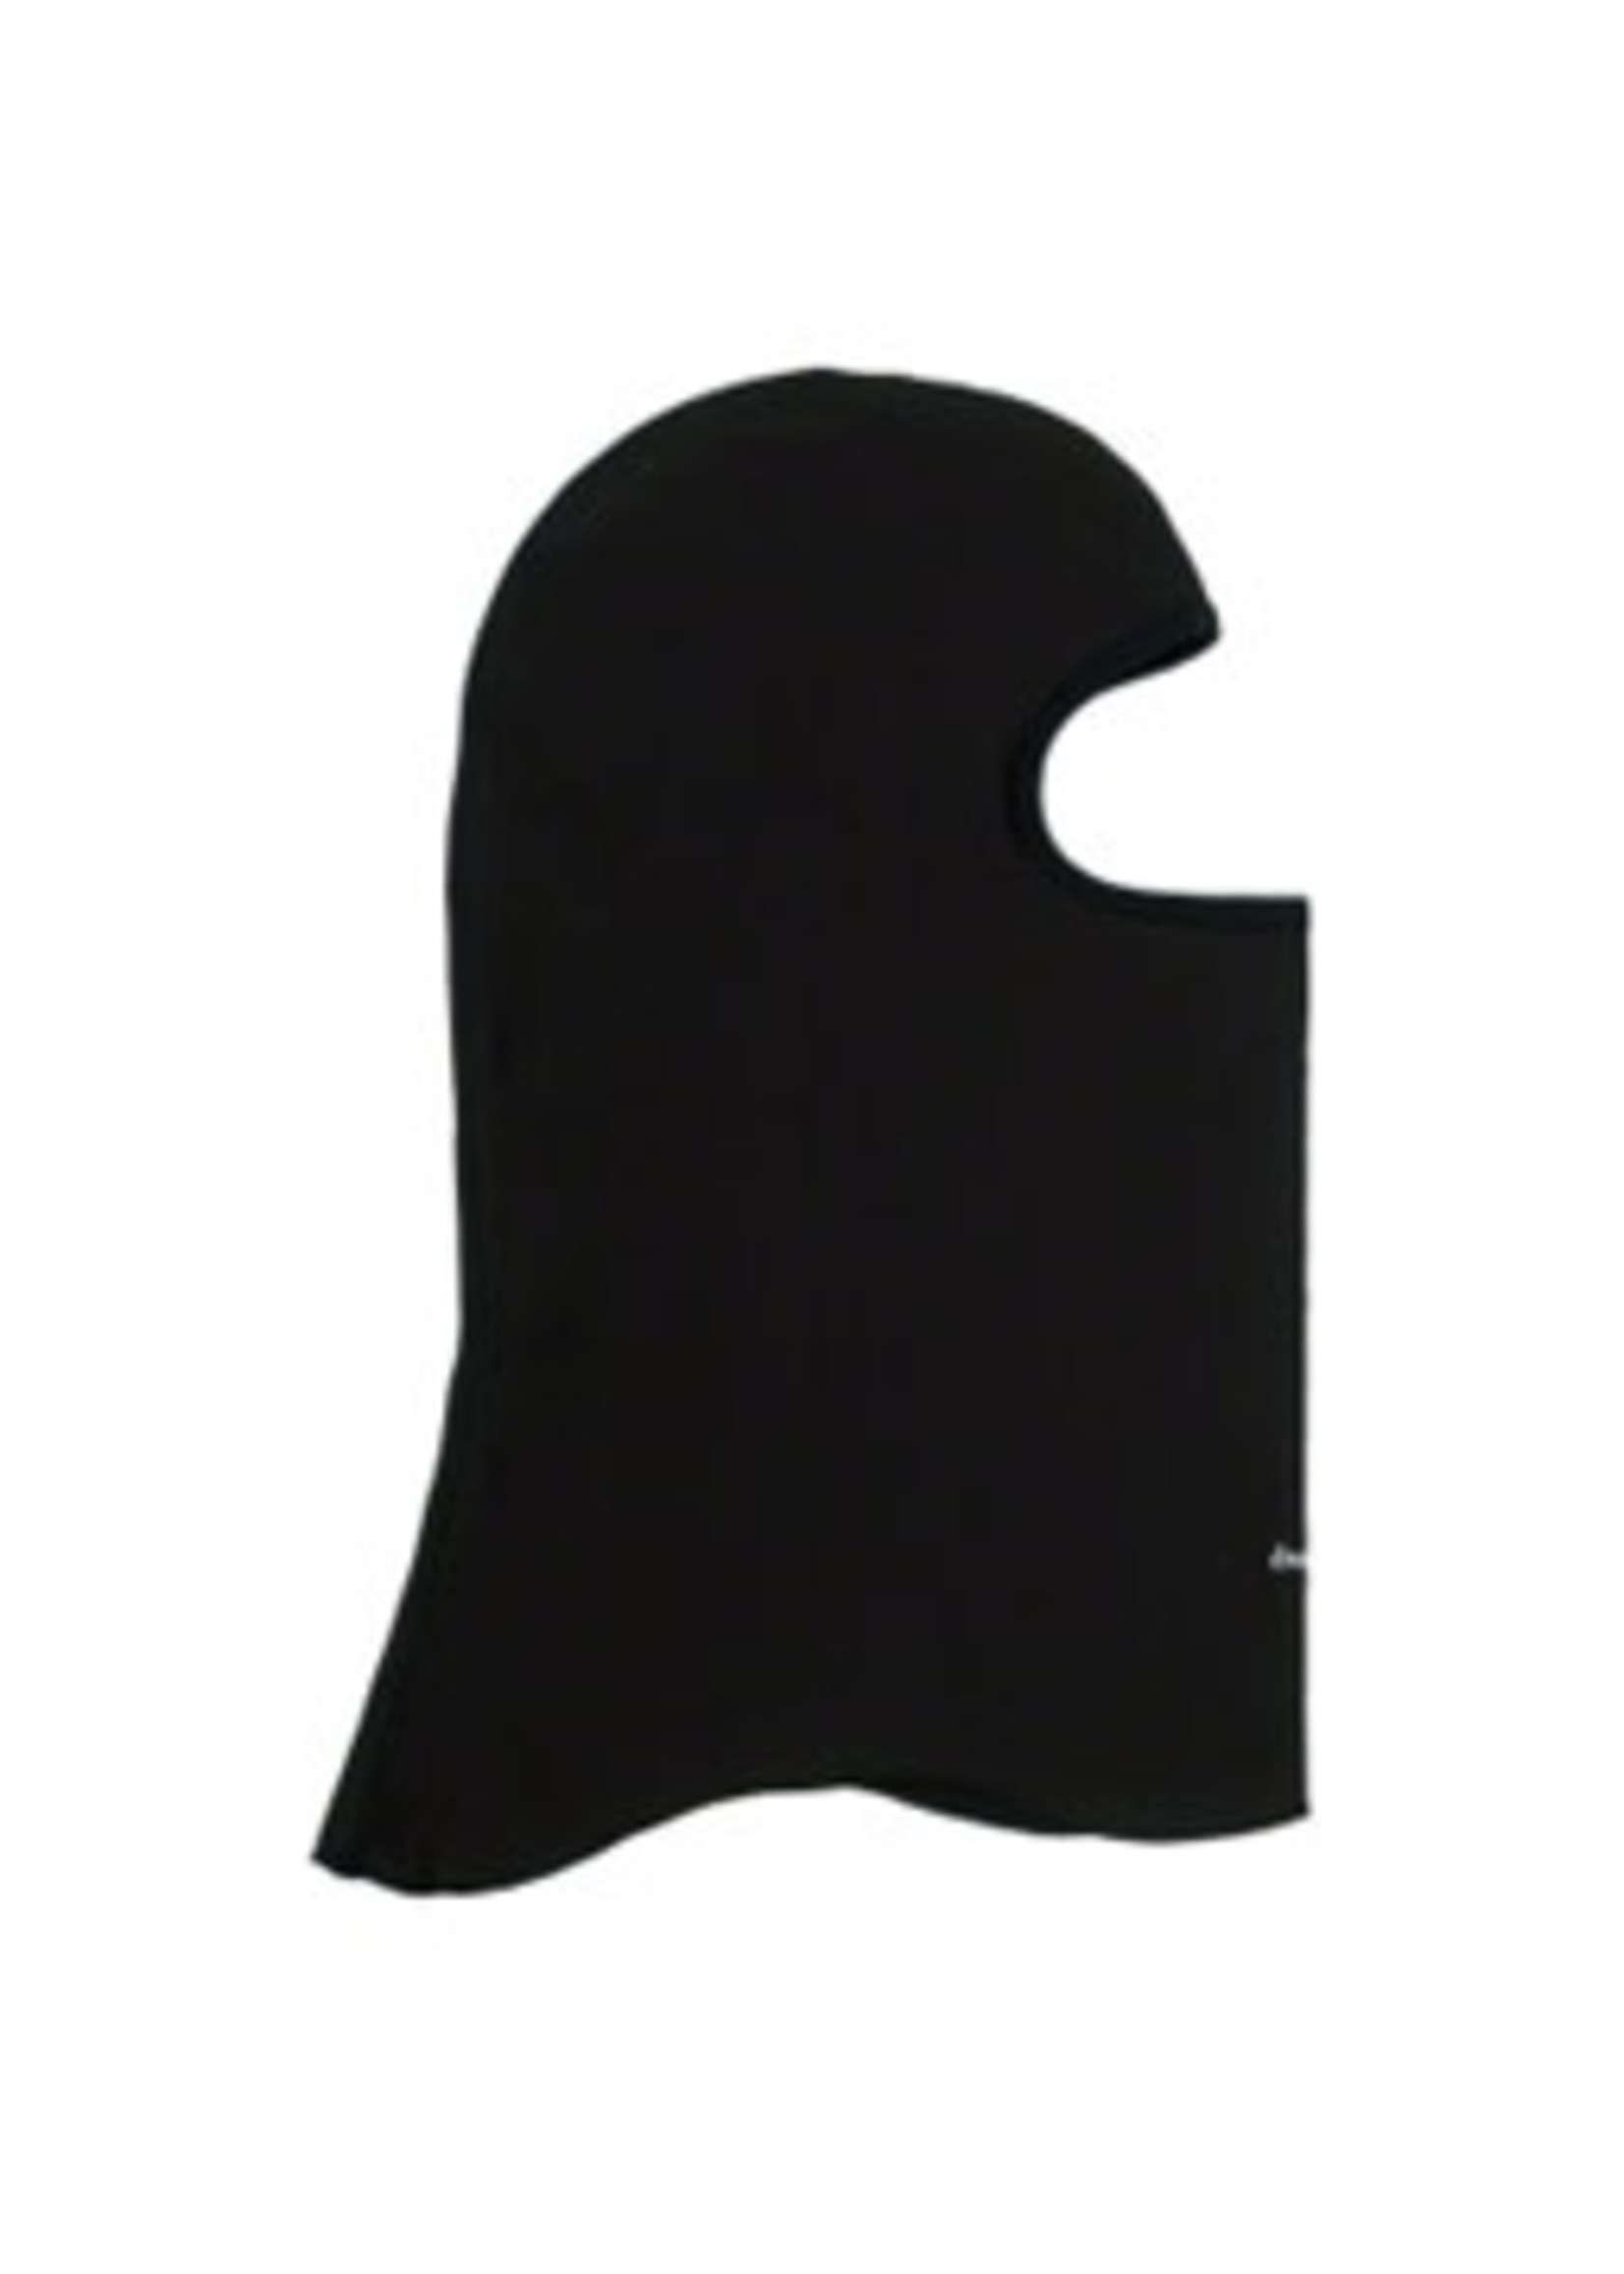 BELLWETHER Bellwether Balaclava: Black One Size